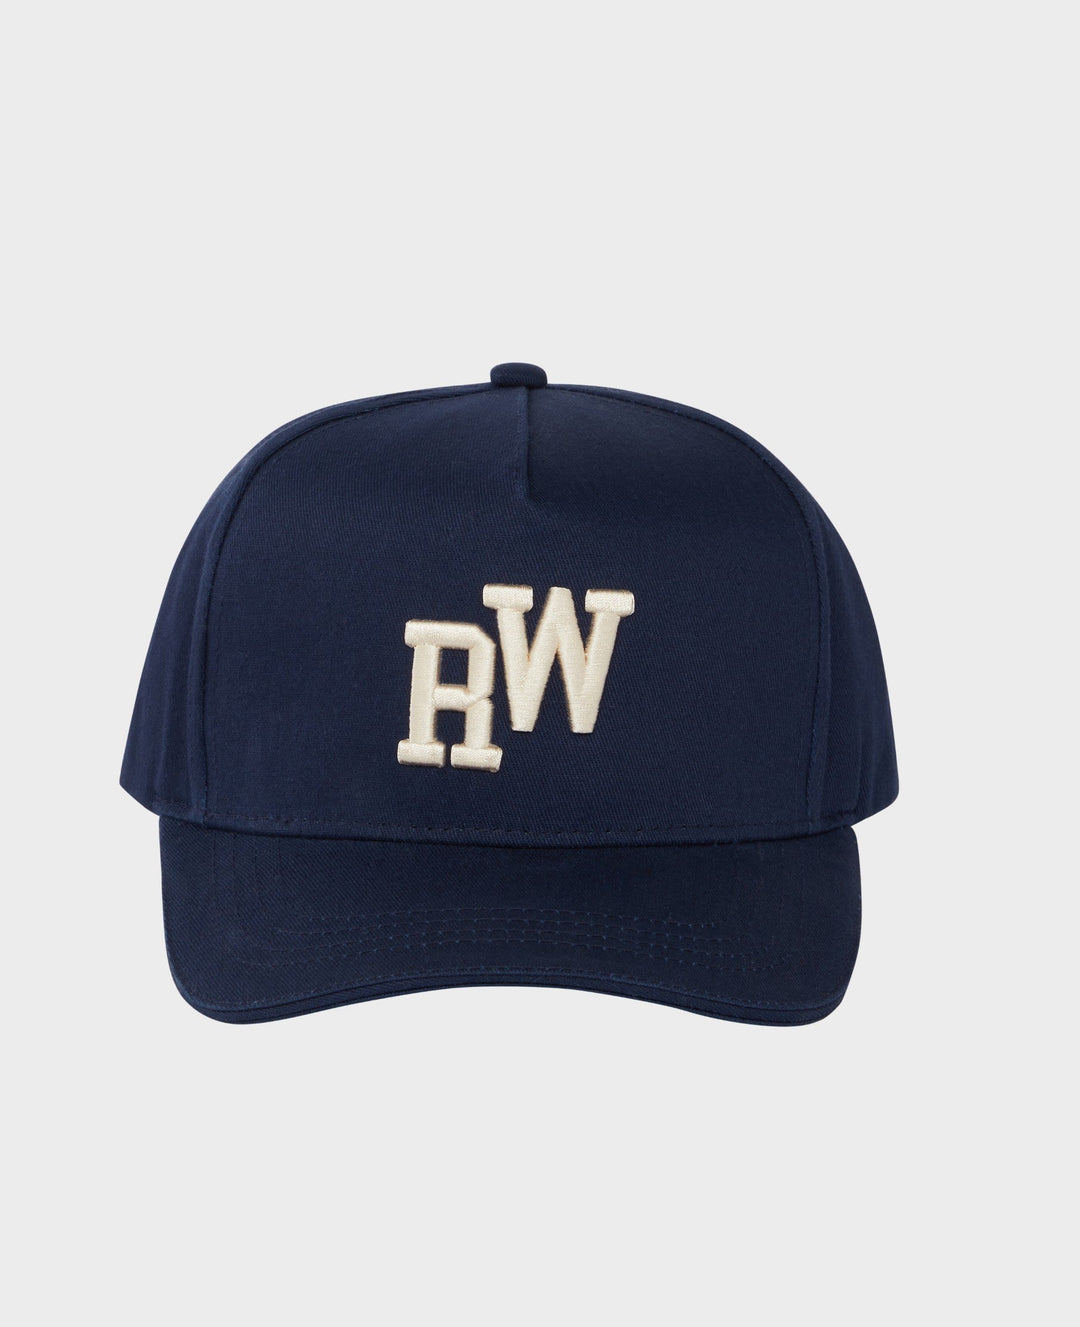 Add some sporty chic to your look this season with our baseball cap in navy, featuring an embossed logo on the front and back, adjustable rear strap and air vent eyelets – all in 100% cotton.